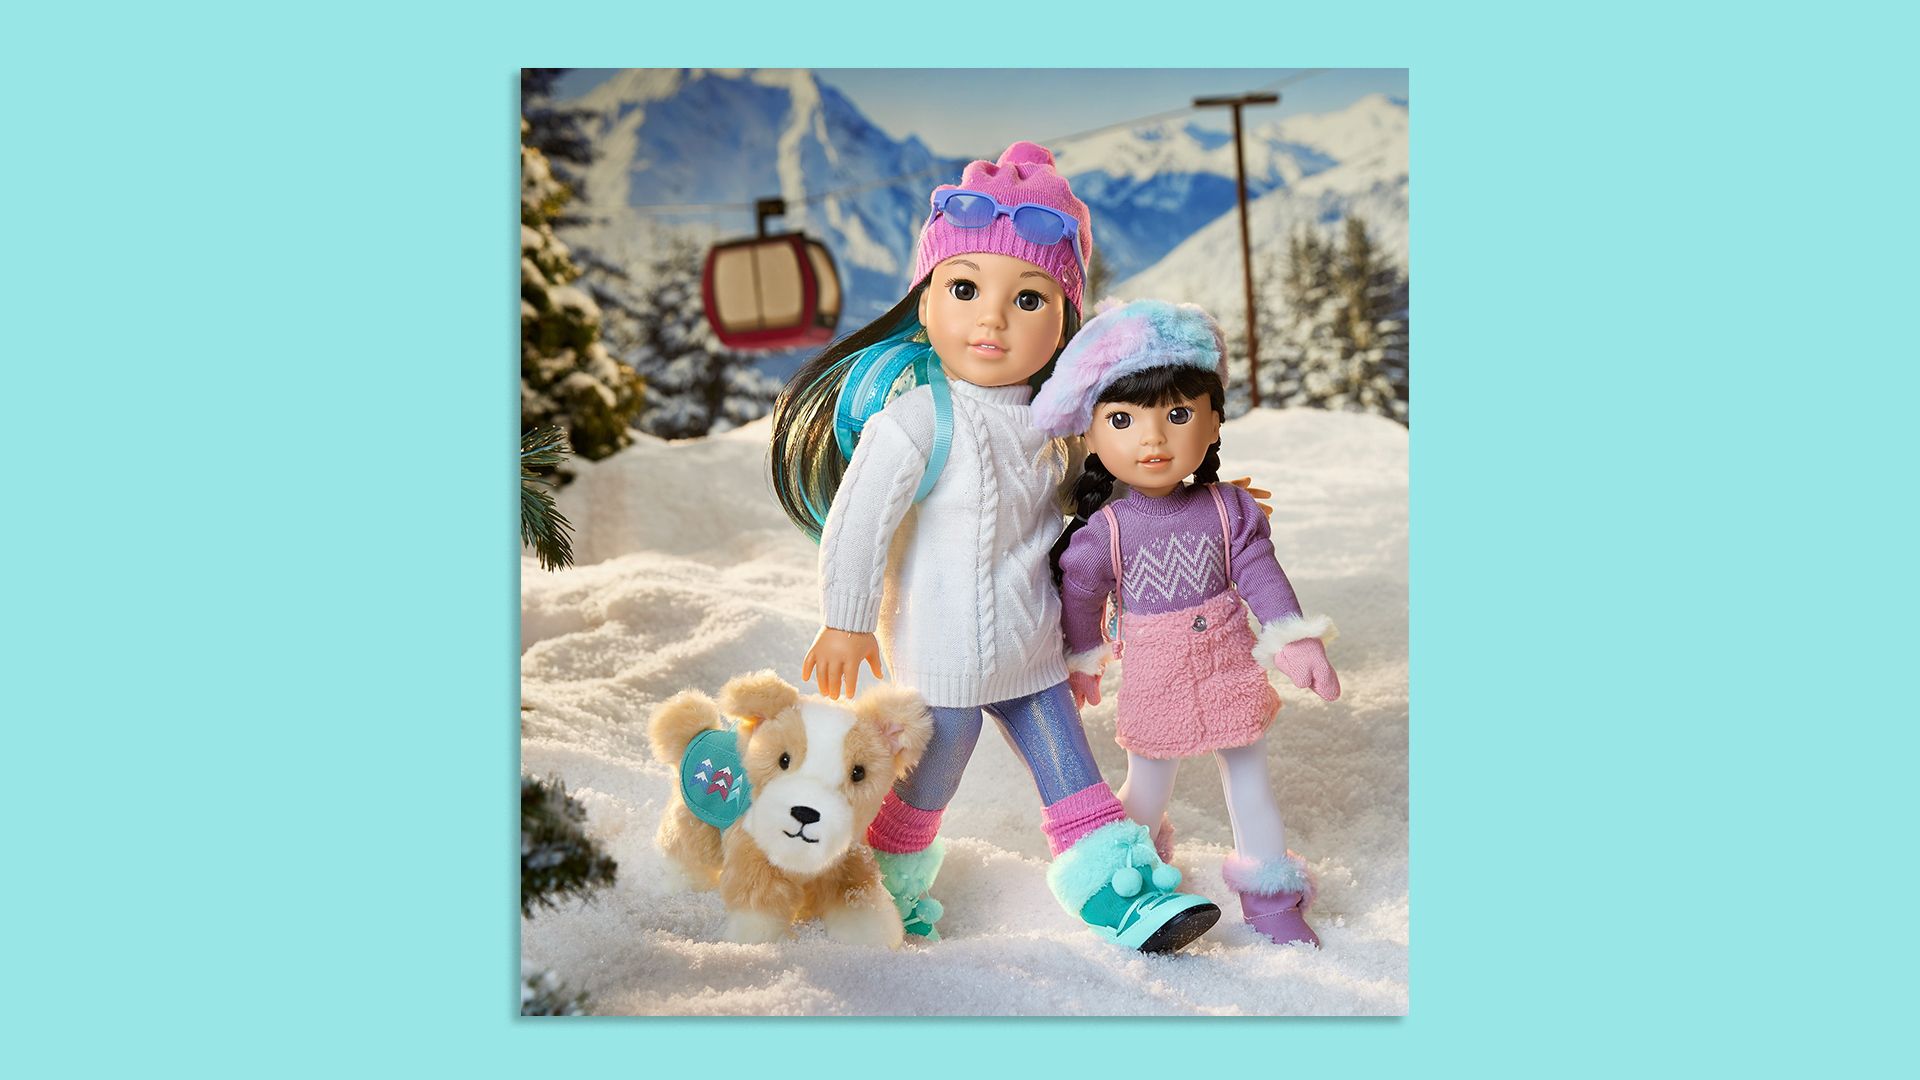 two Chinese American dolls from American Girl shown on a fake ski slope with a toy dog